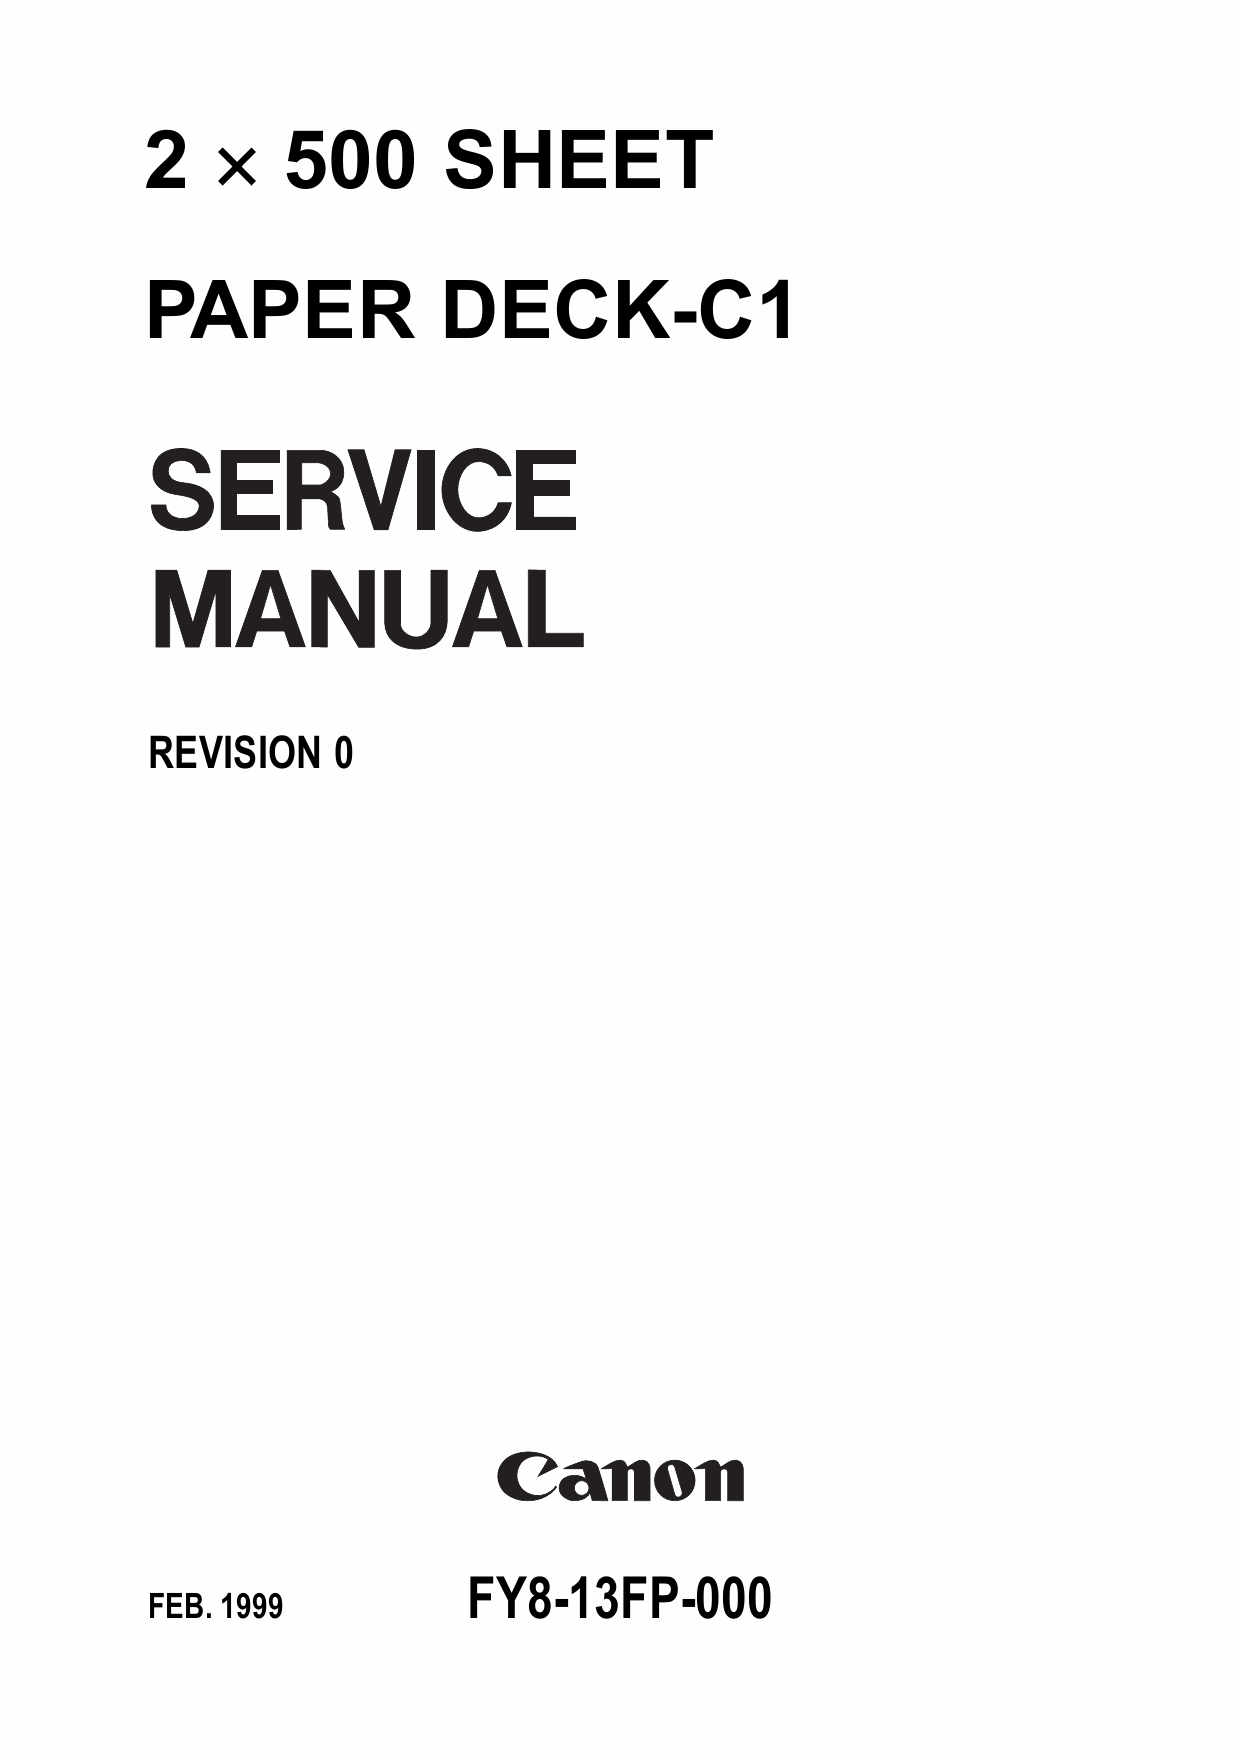 Canon Options Sheet2x500 Paper-Deck C1 Parts and Service Manual-1